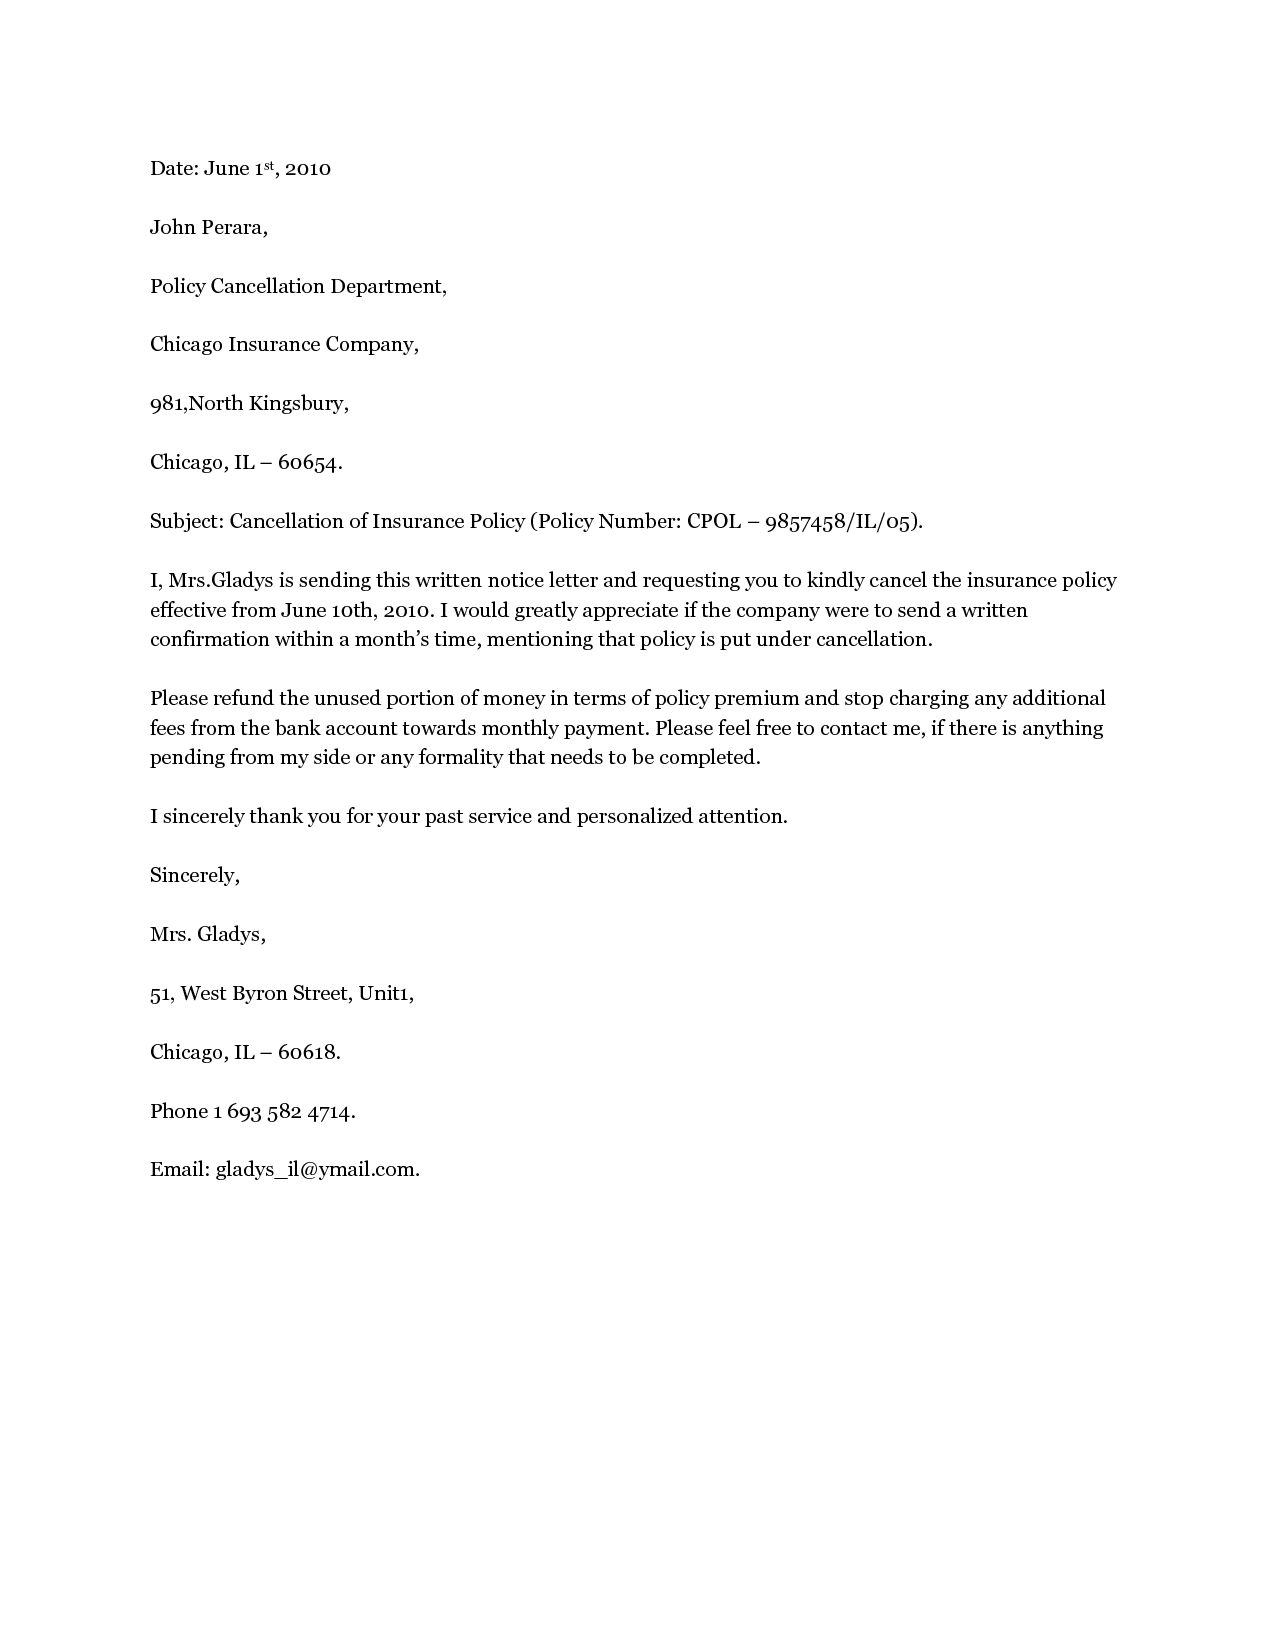 Cancellation Letter Template - Download Insurance Cancellation Letter Sample Letters by Panniuniu